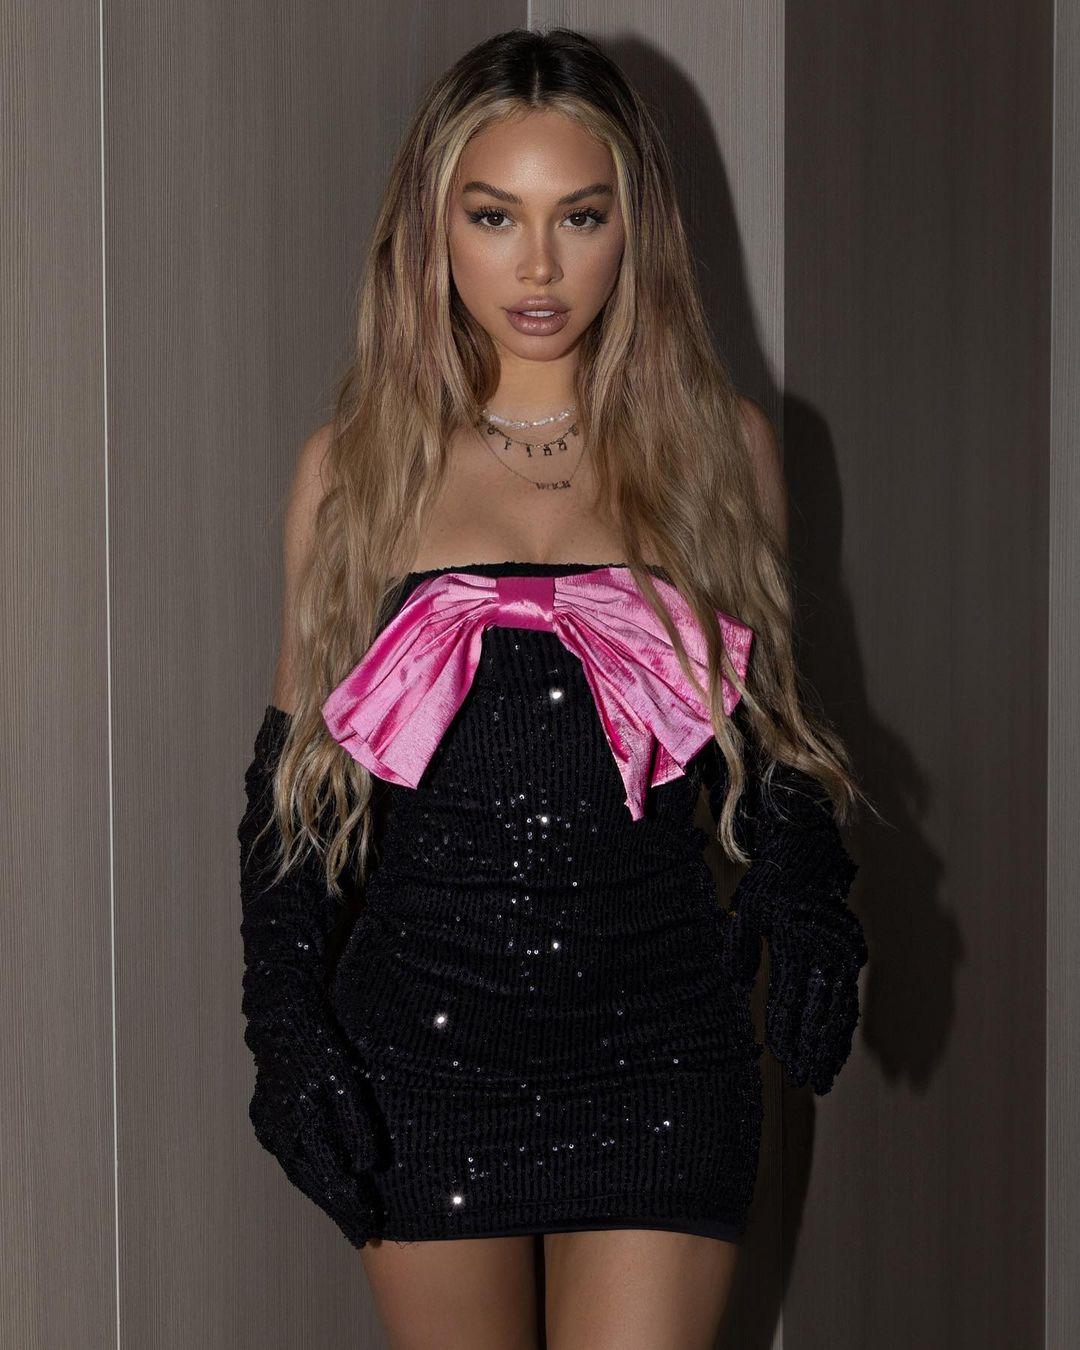 Corinne Olympios wears black and pink holiday dress